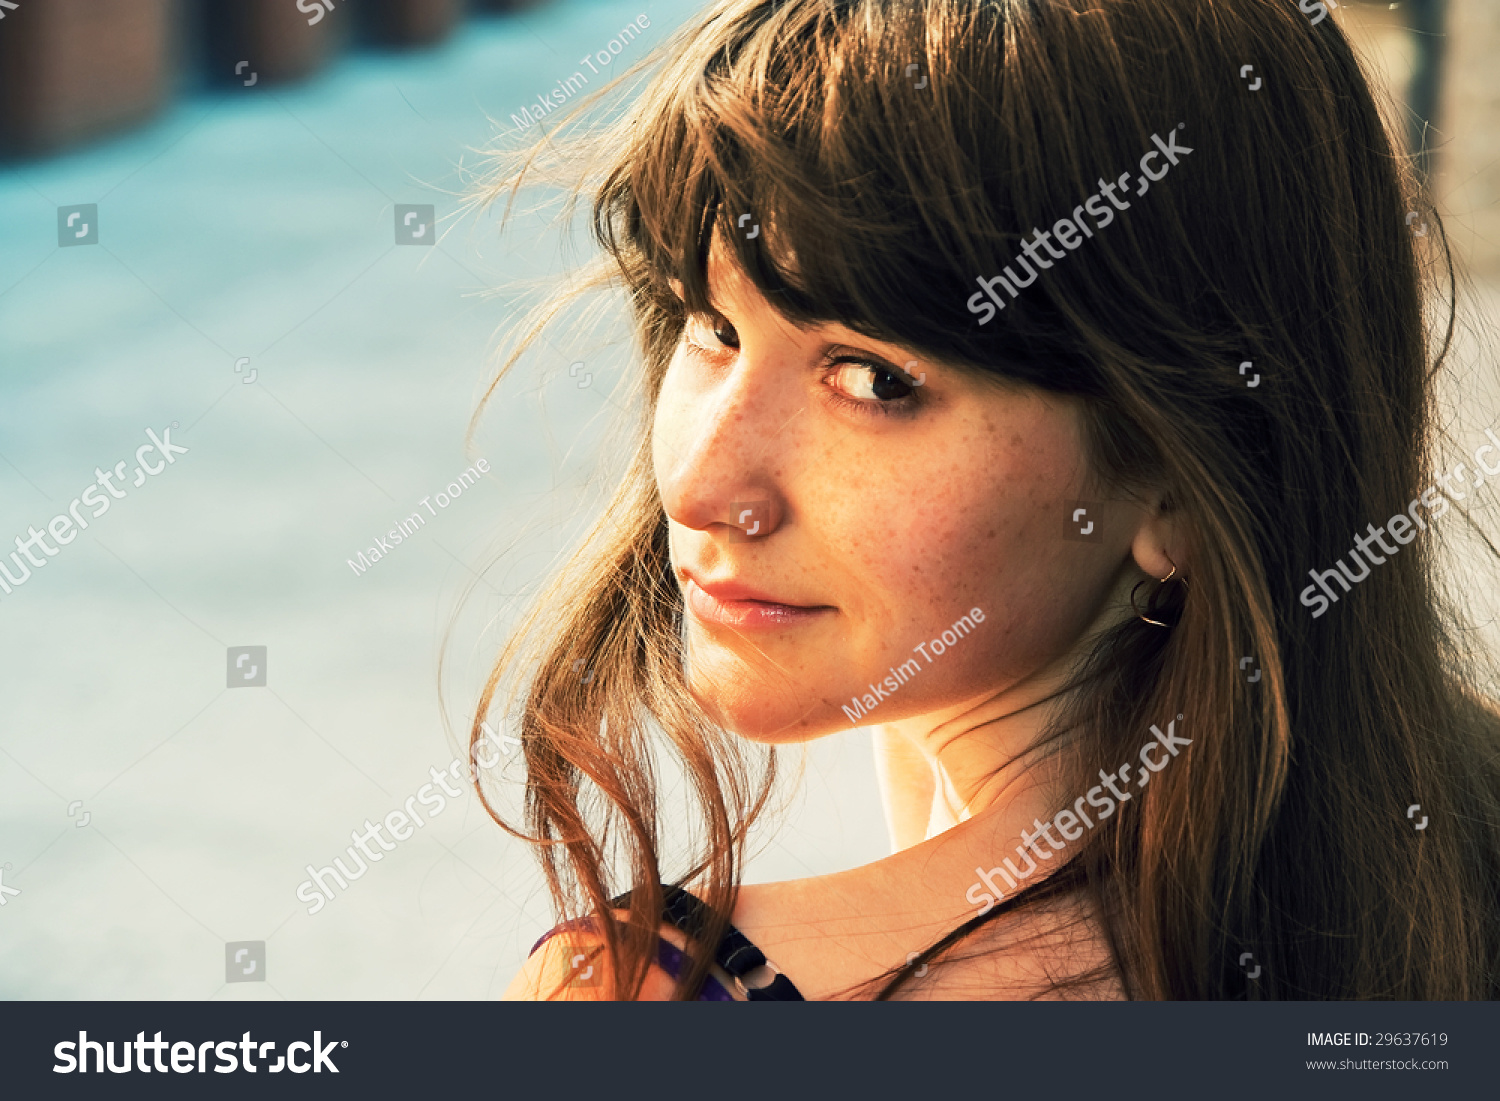 young cute girl looking back over stock photo edit now 29637619 https www shutterstock com image photo young cute girl looking back over 29637619